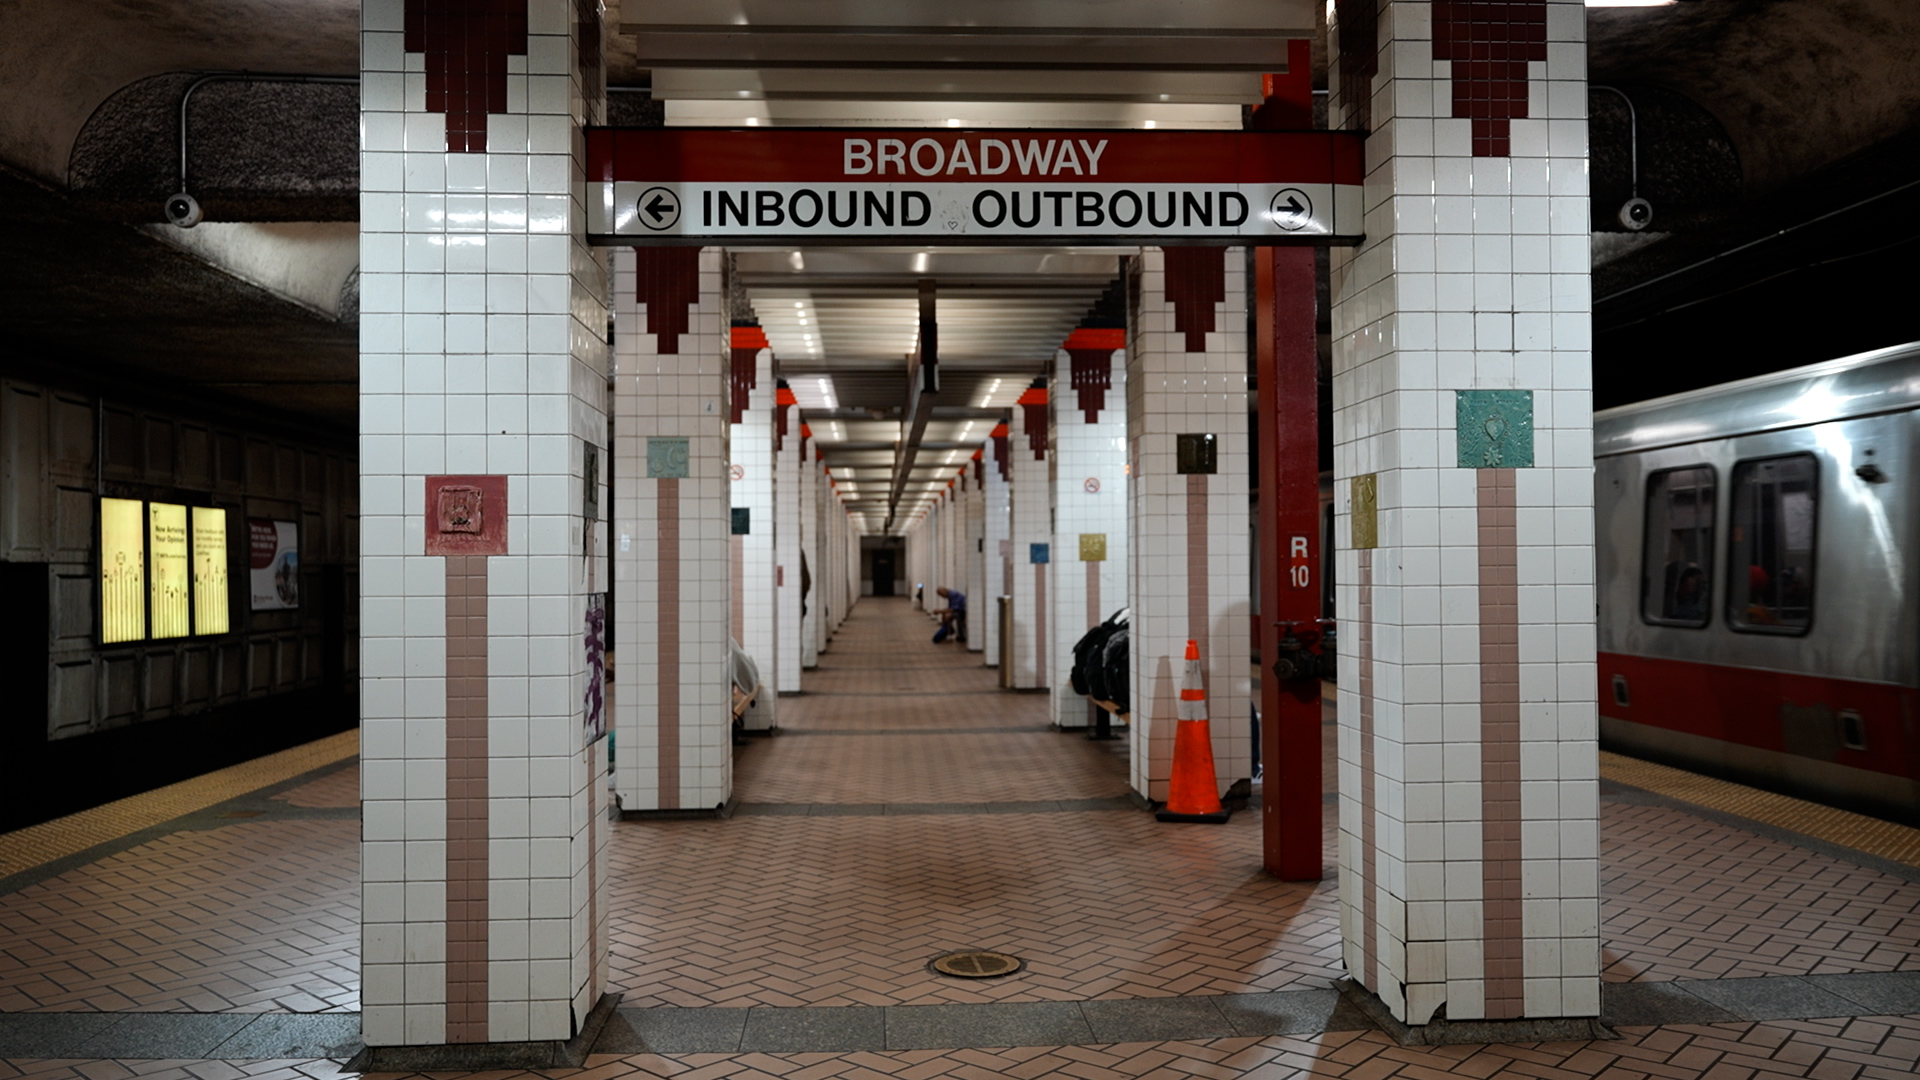 Before Dragging Death, MBTA Subways Had Hundreds of Door Incidents Each Year